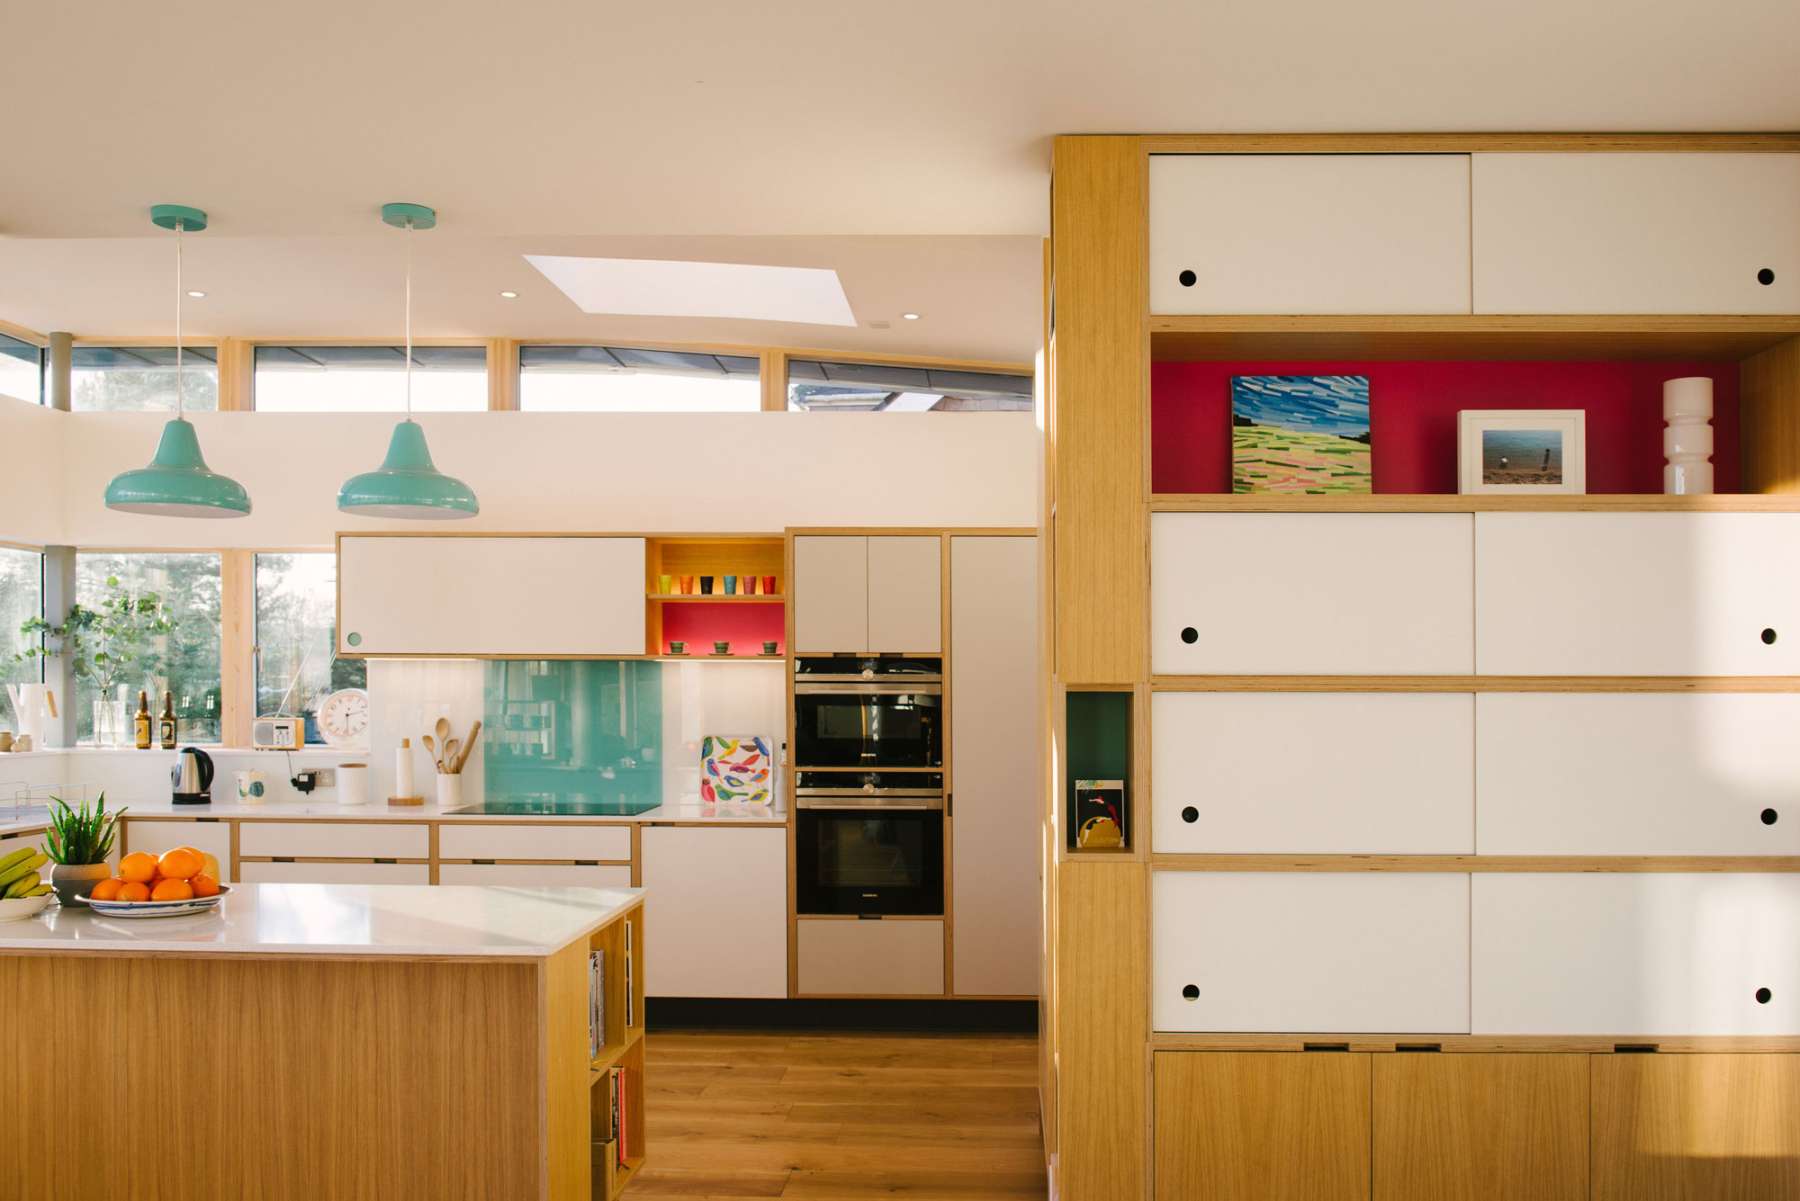 Plywood Kitchens - Bespoke kitchen designs from Wood & Wire